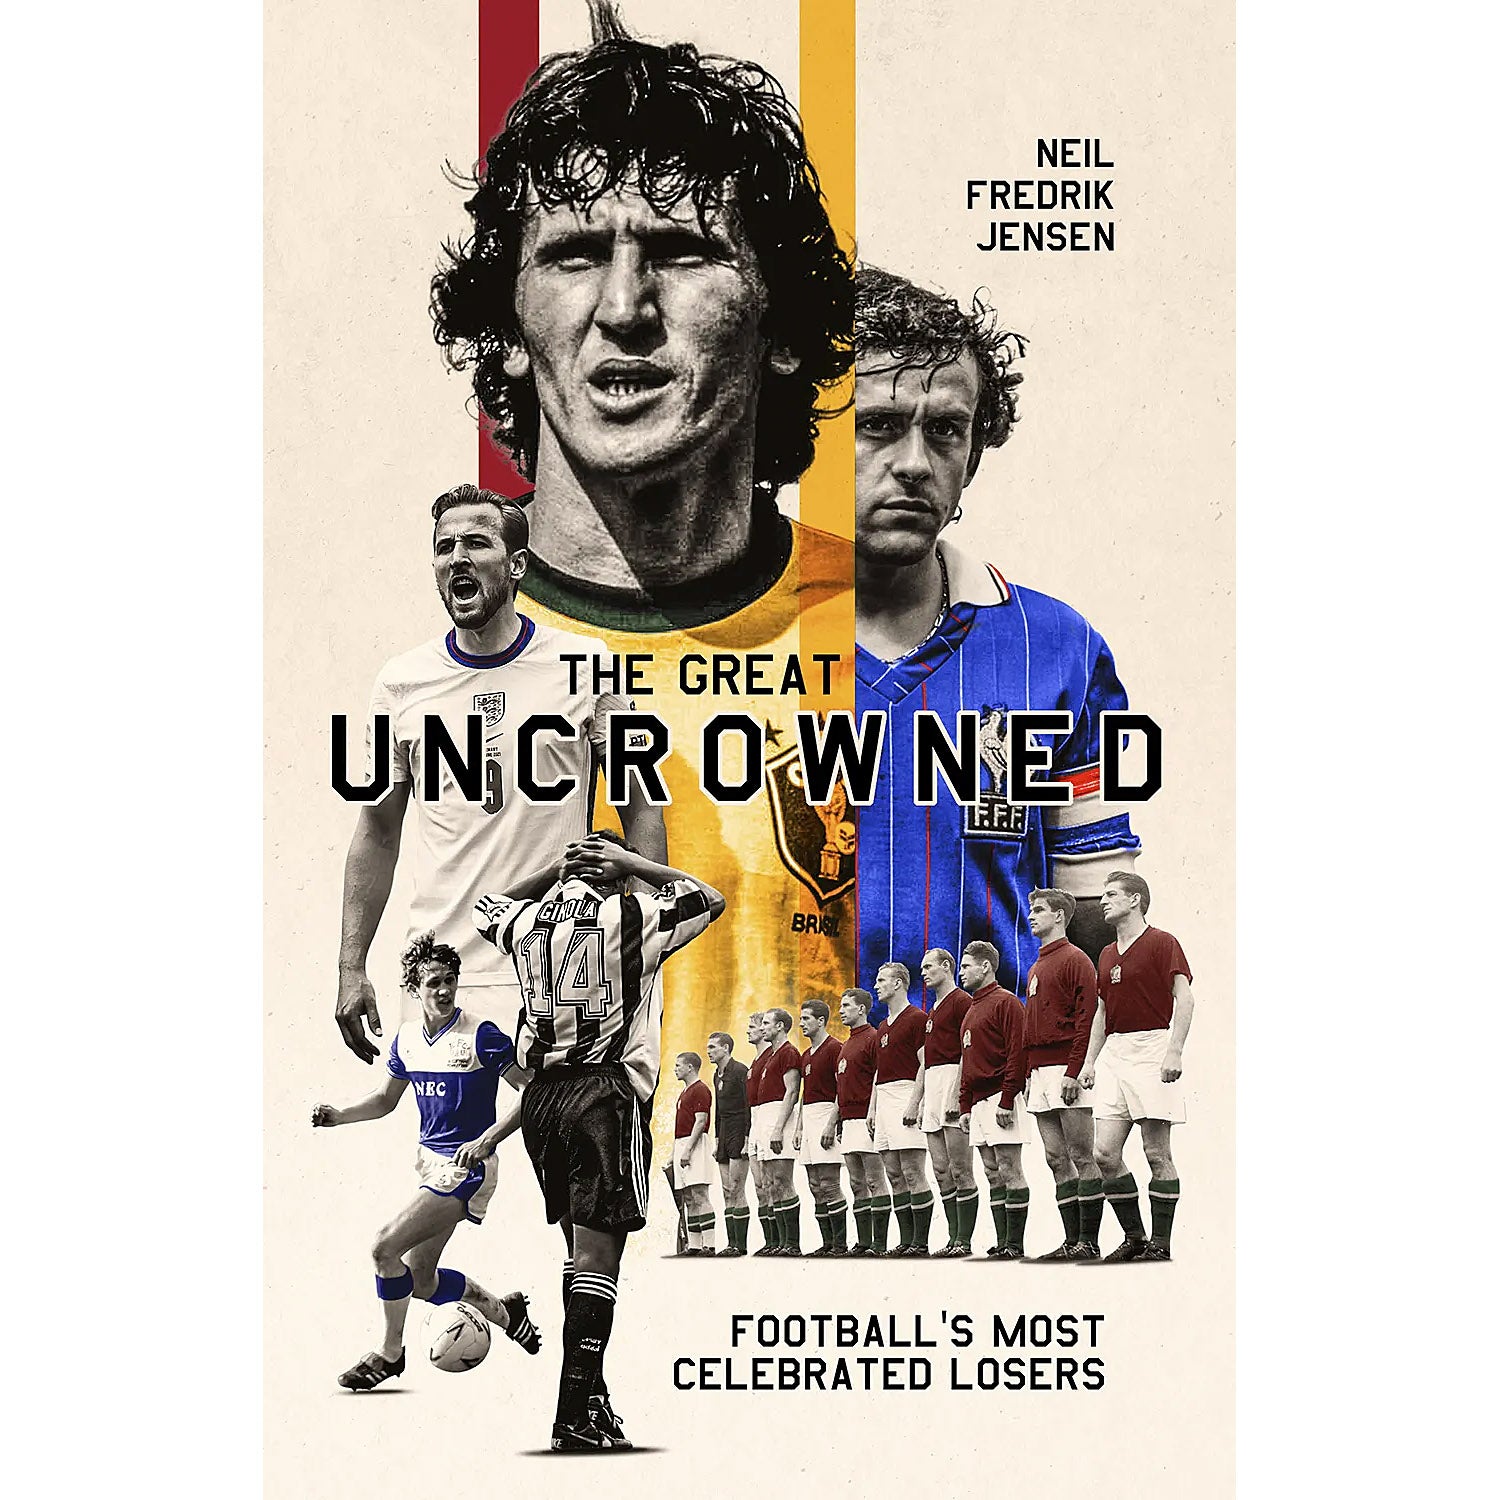 The Great Uncrowned – Football's Most Celebrated Losers